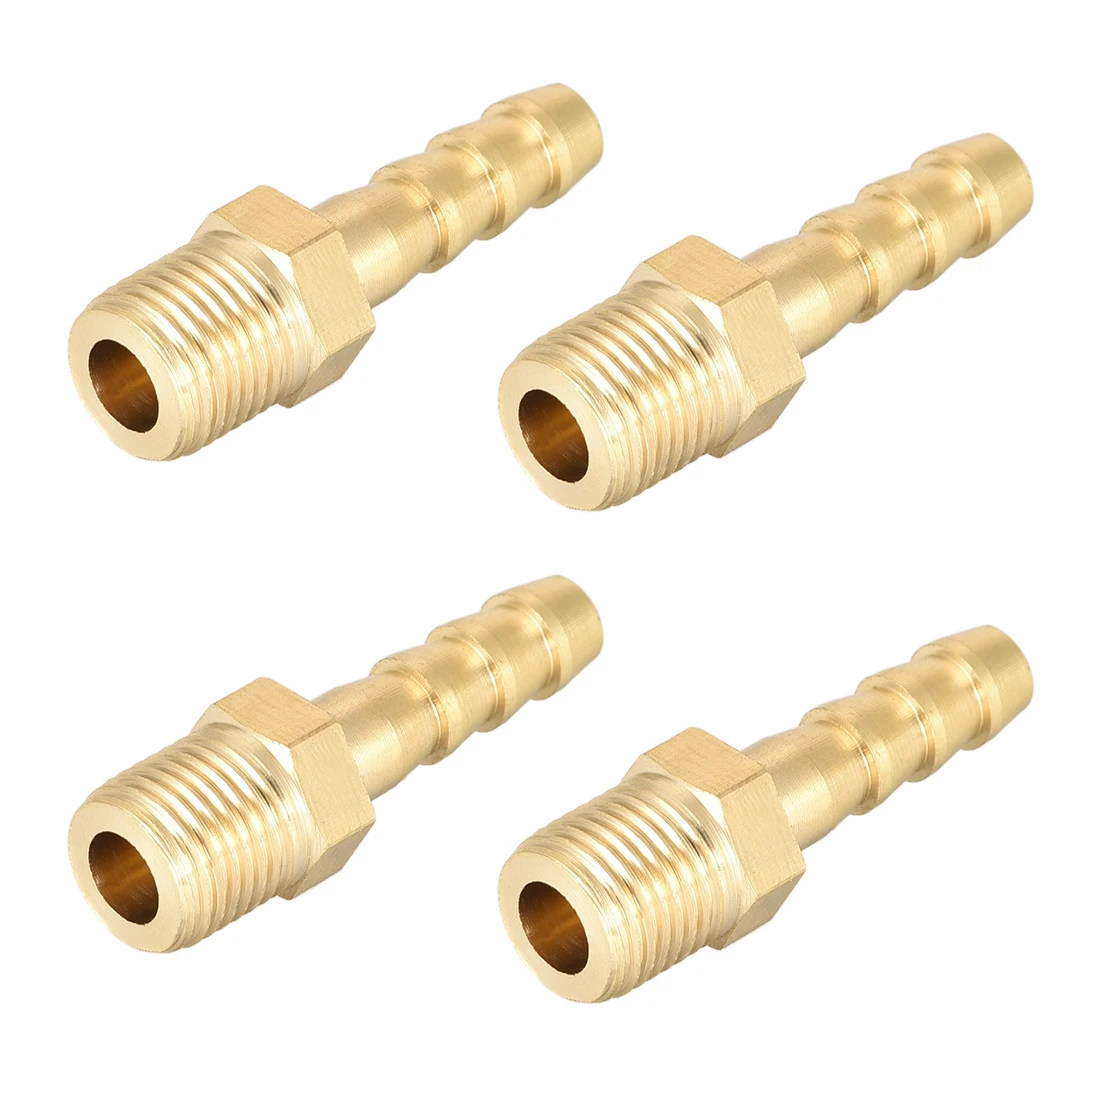 uxcell Brass Fitting Connector Metric M10x1 Male to Barb Hose ID 6mm 4pcs fag h306 adapter sleeve metric 25mm id